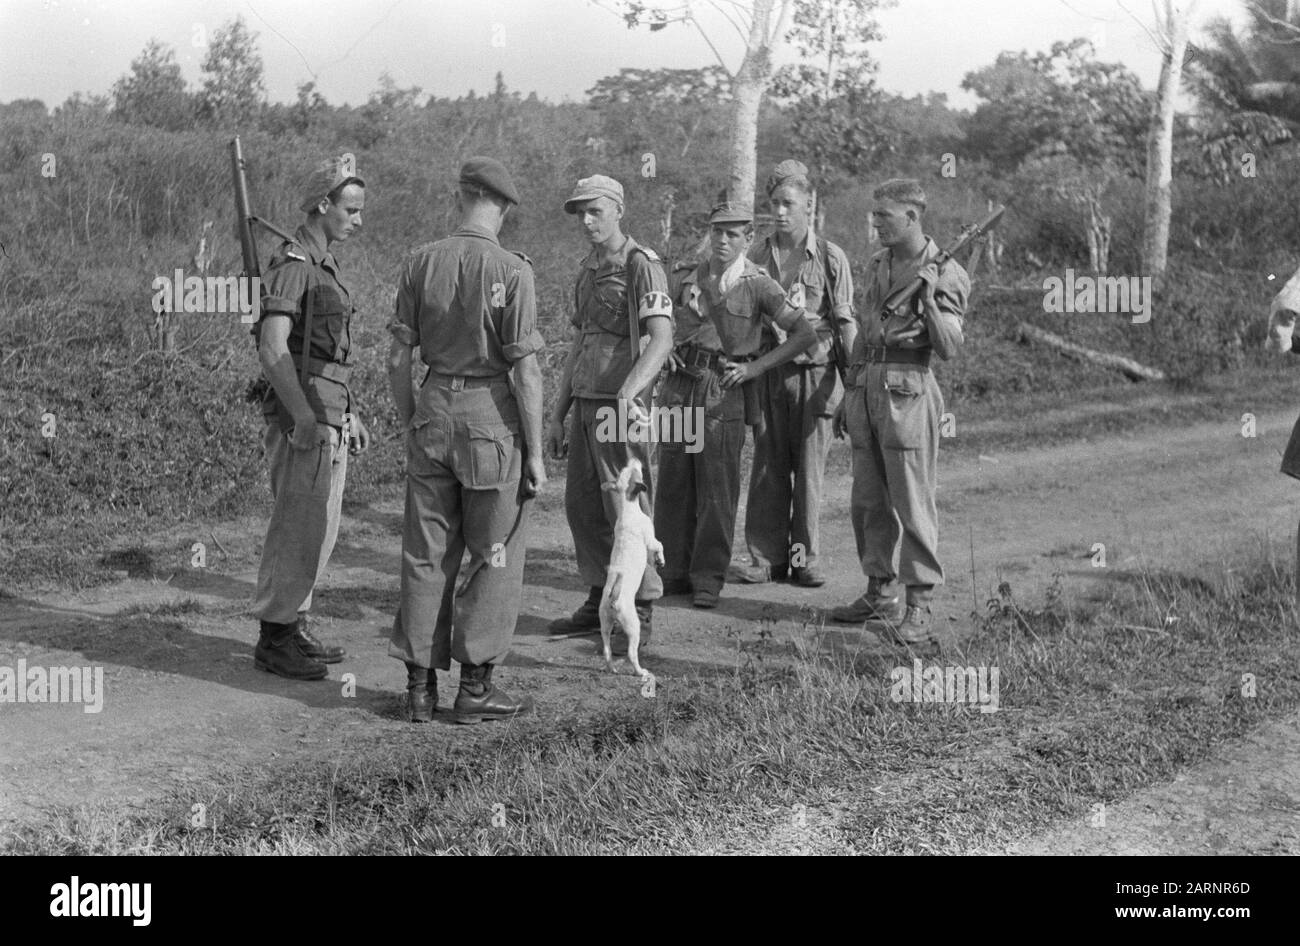 Recordings concerning border traffic  Tinggi Hari. A patrol returns. The commander of the department of Tinggi Hari, 2nd Lieutenant P.J.C. van Leuvenstein from Den Helder, listens to the experiences and impressions of this journey. Meanwhile, the little dog Tommy greets his boss, Sergeant Oos Smits from Zuilen. The patrol also consists of Soldier 1e klasse Jenne Fontijn from Amsterdam, soldier 1st class Koen Kort from Dordrecht and the soldiers Wim Jansen from Arnhem and Antoon Leudenkamp from Weerselo Date: 29 July 1948 Location: Indonesia, Java, Dutch East Indies, Tinggi Hari Stock Photo